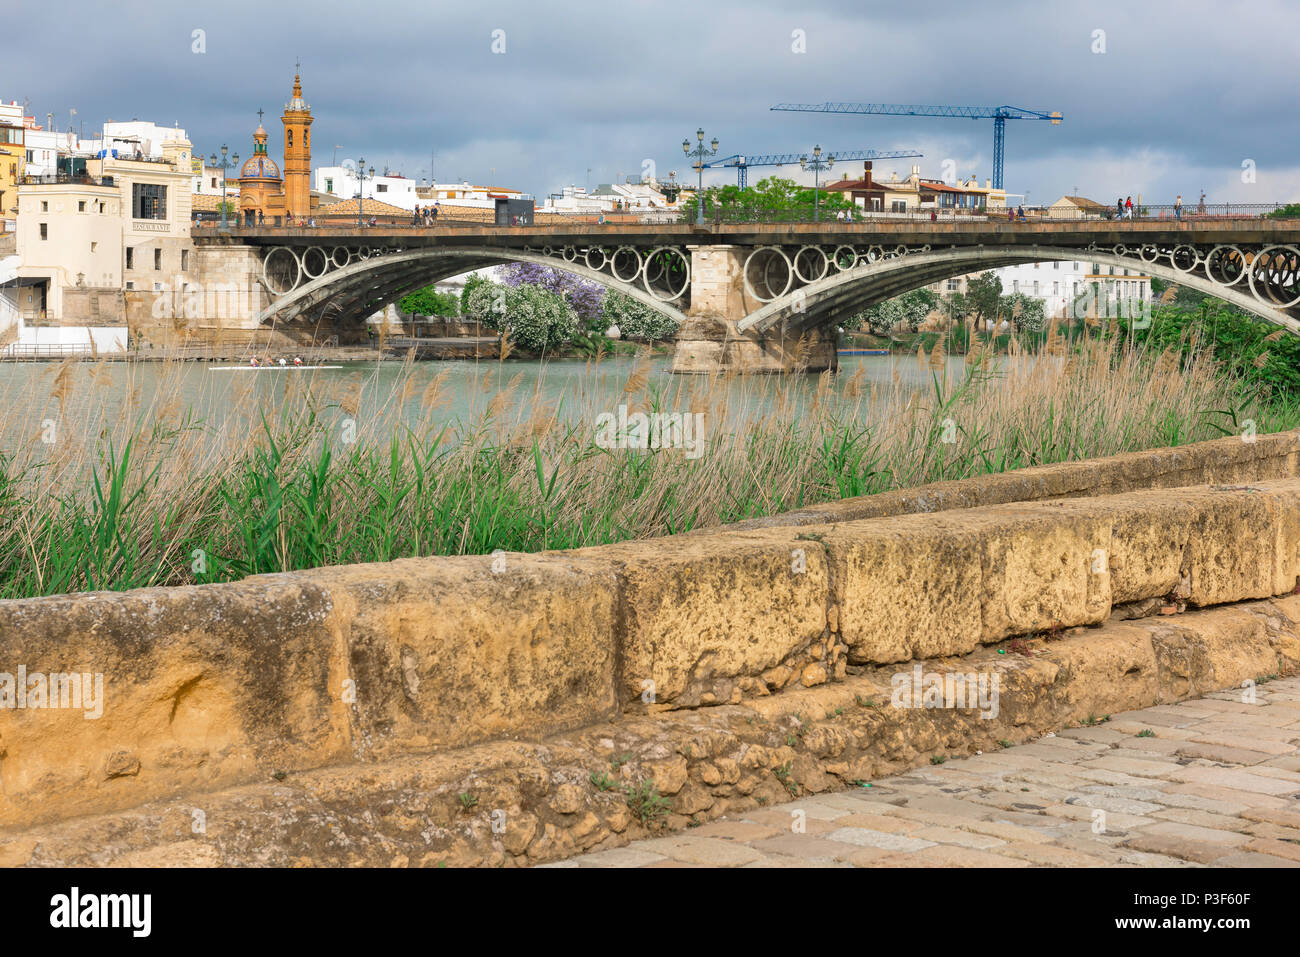 Seville river, view across the Rio Guadalquivir towards the Triana barrio of Seville with a section of the medieval city wall in the foreground, Spain. Stock Photo